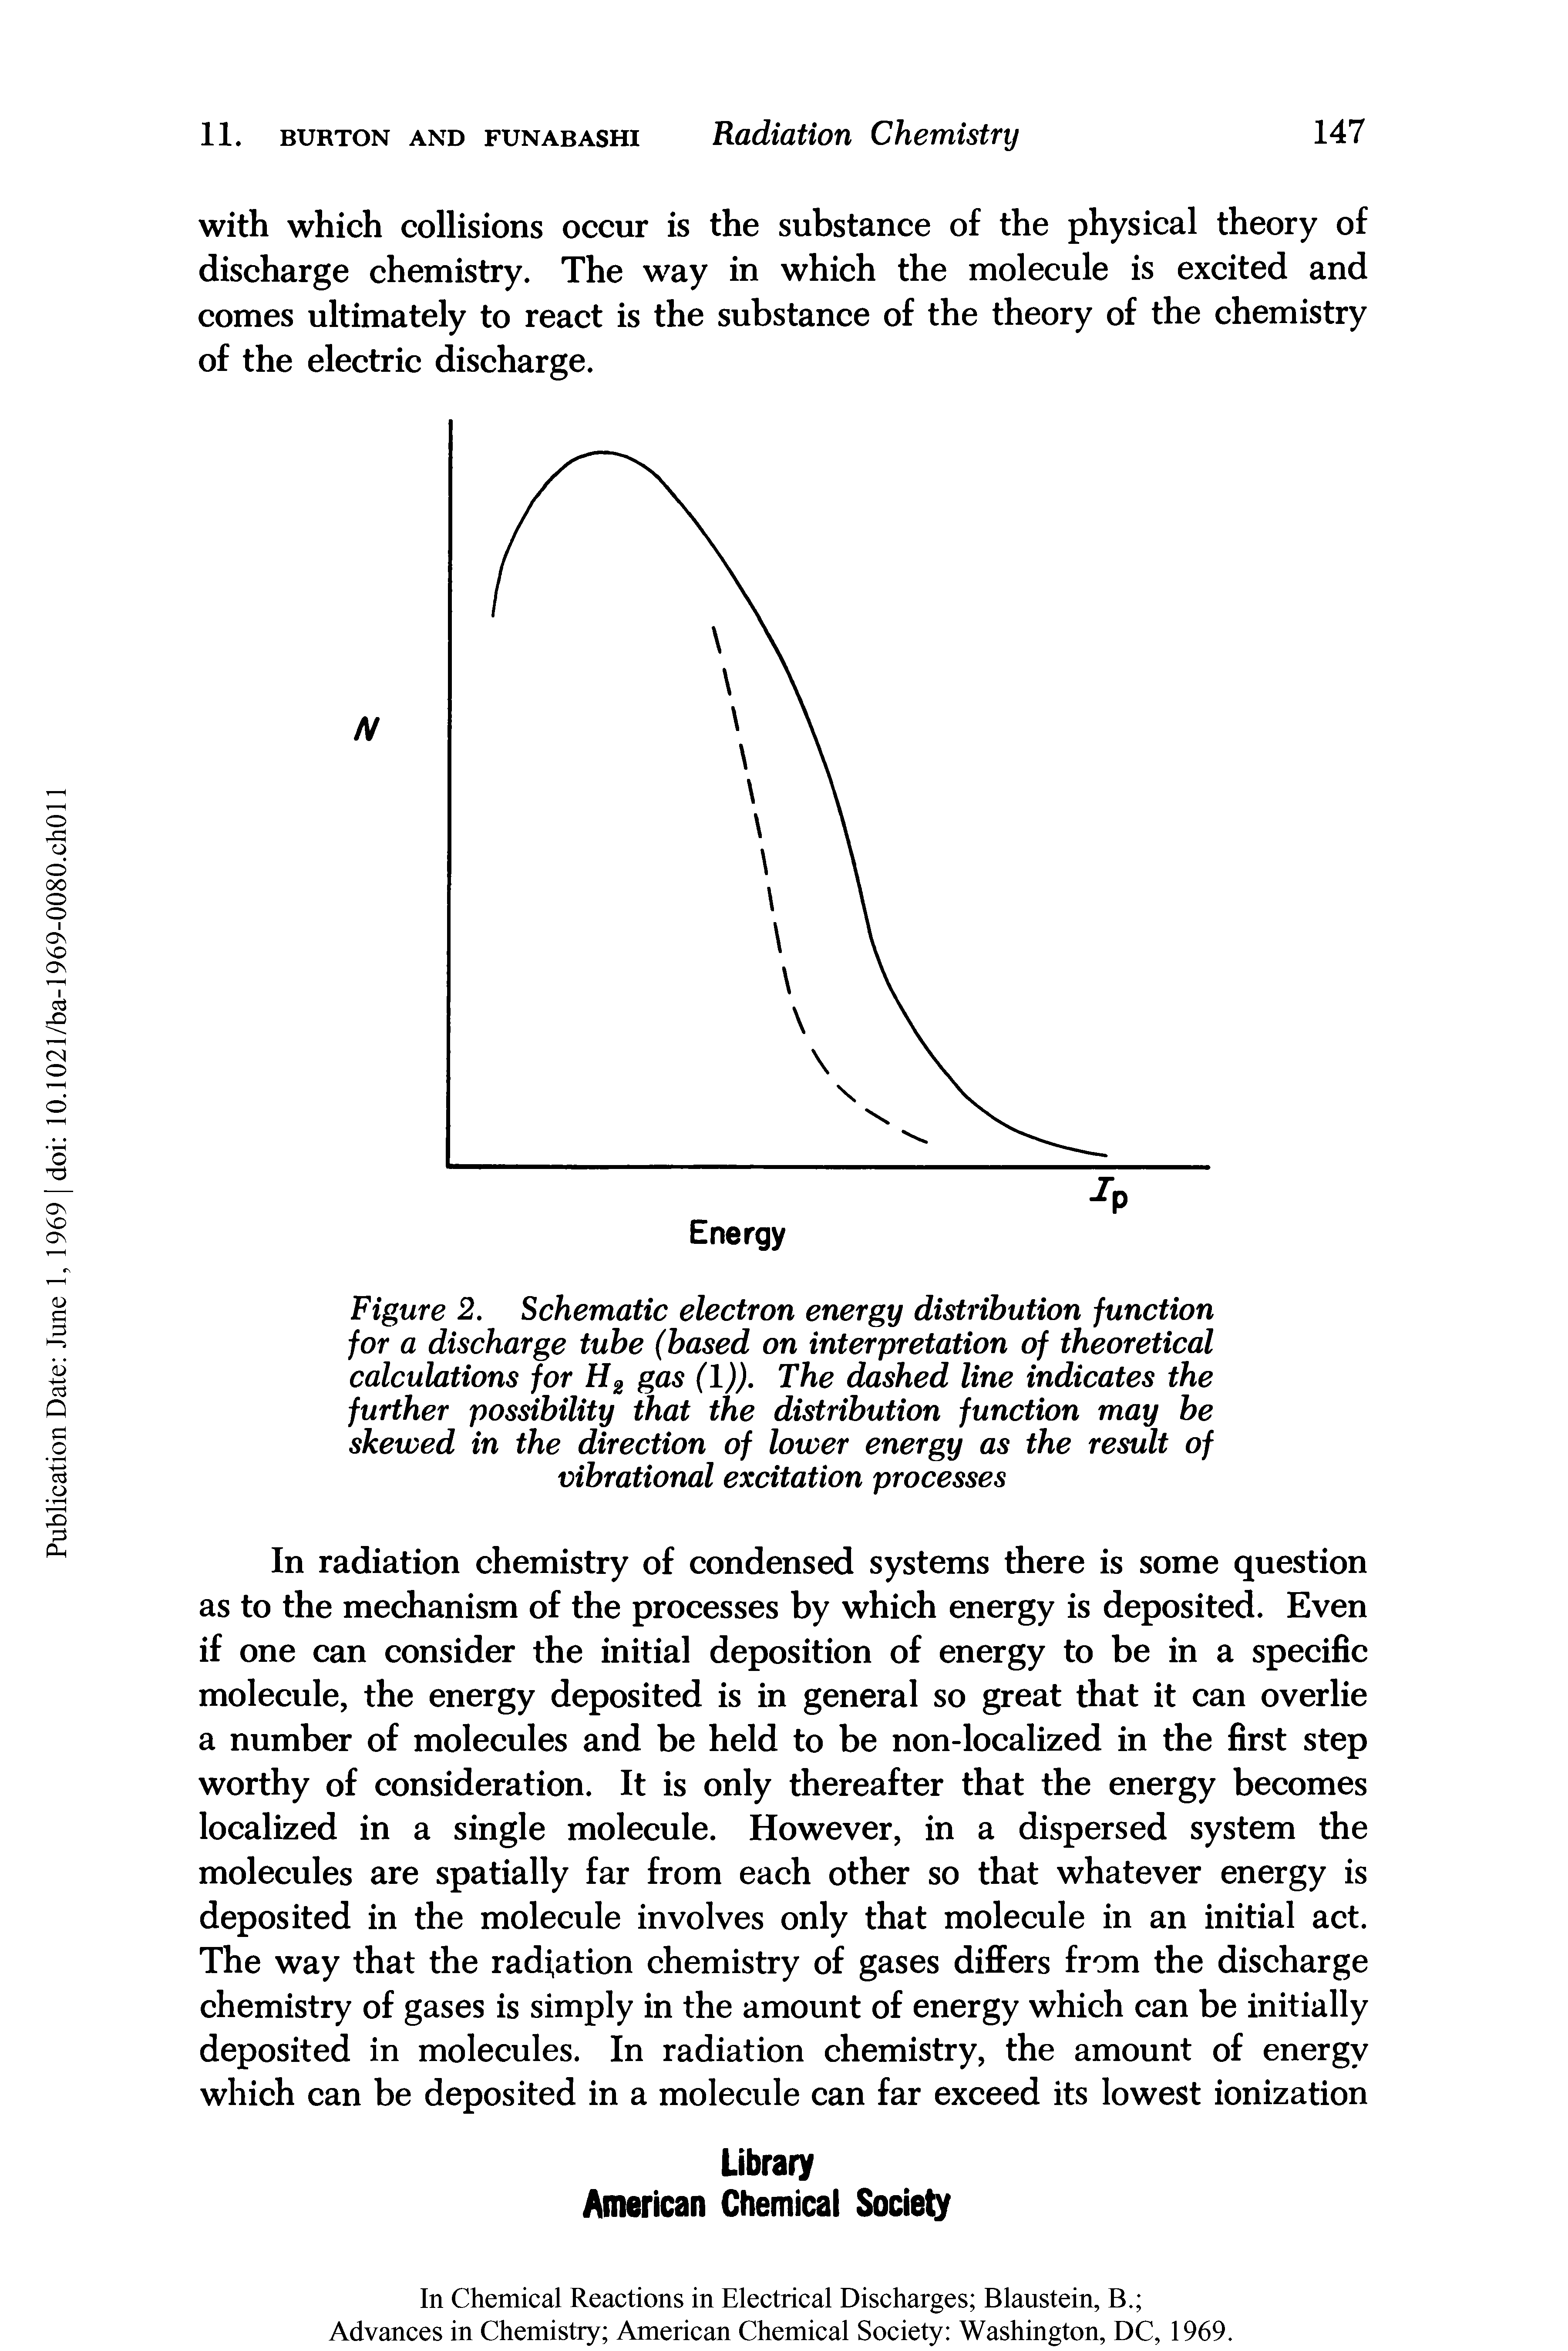 Figure 2. Schematic electron energy distribution function for a discharge tube (based on interpretation of theoretical calculations for H2 gas (1)). The dashed line indicates the further possibility that the distribution function may be skewed in the direction of lower energy as the result of vibrational excitation processes...